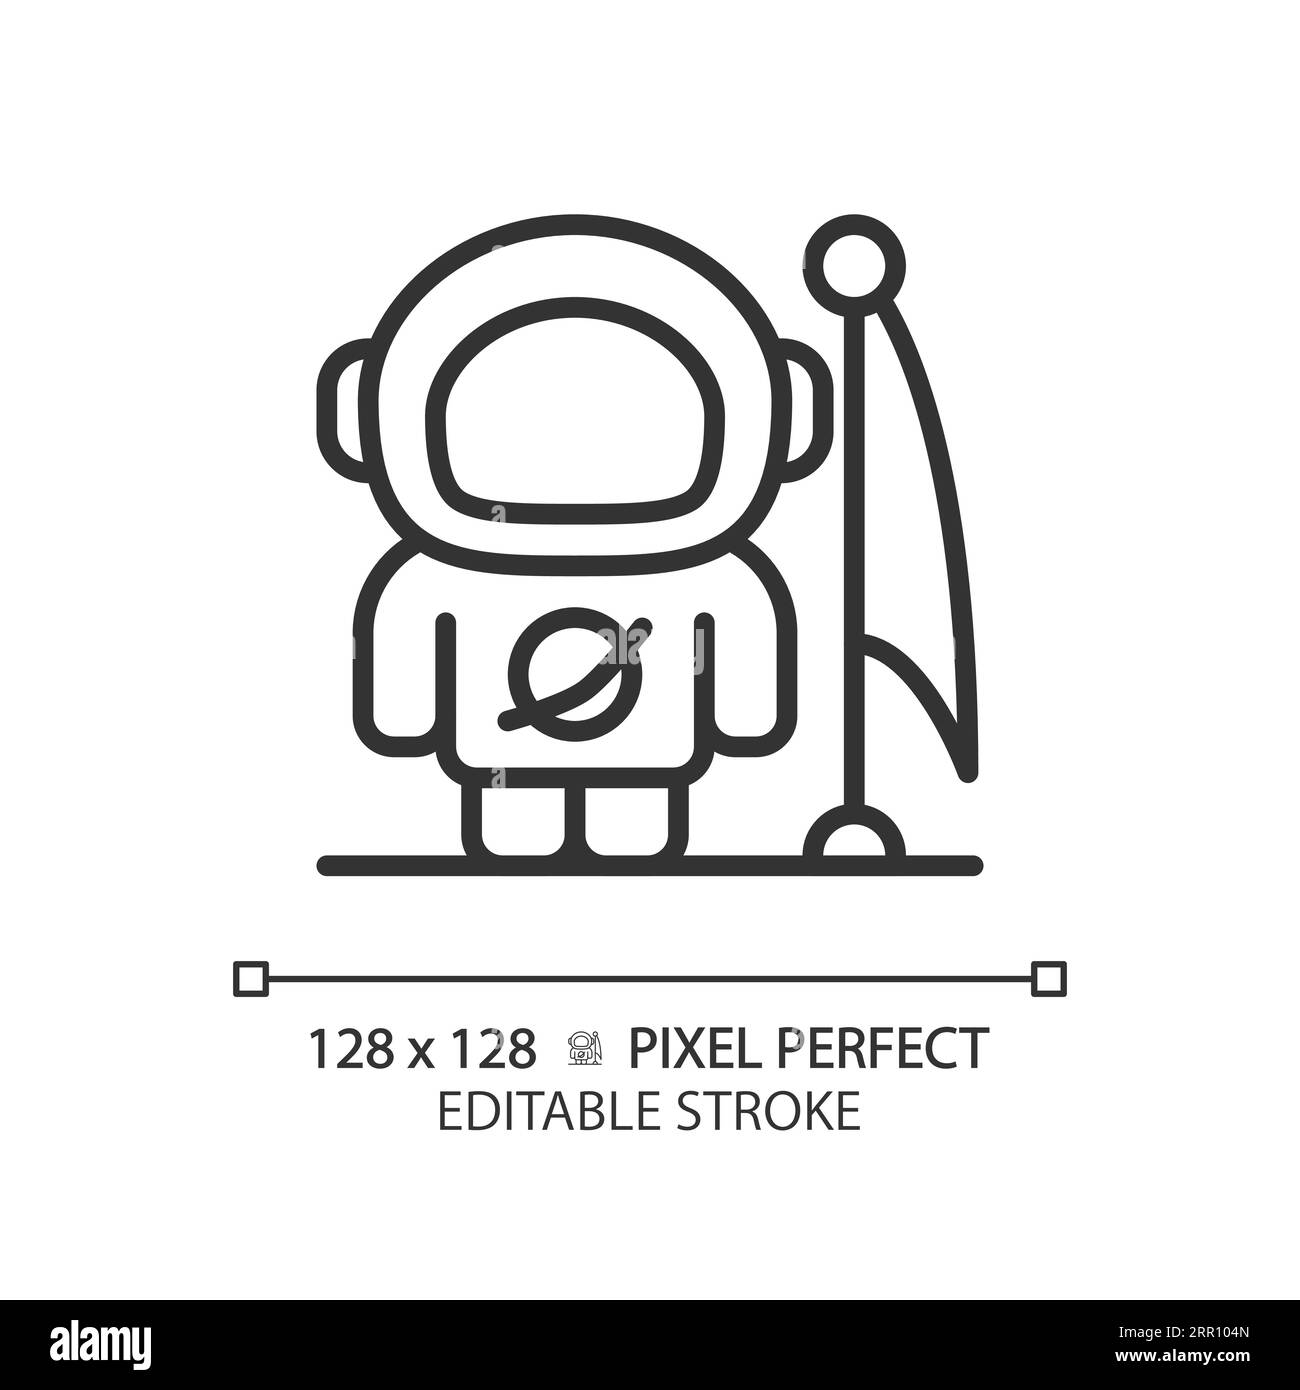 Man on moon pixel perfect linear icon Stock Vector